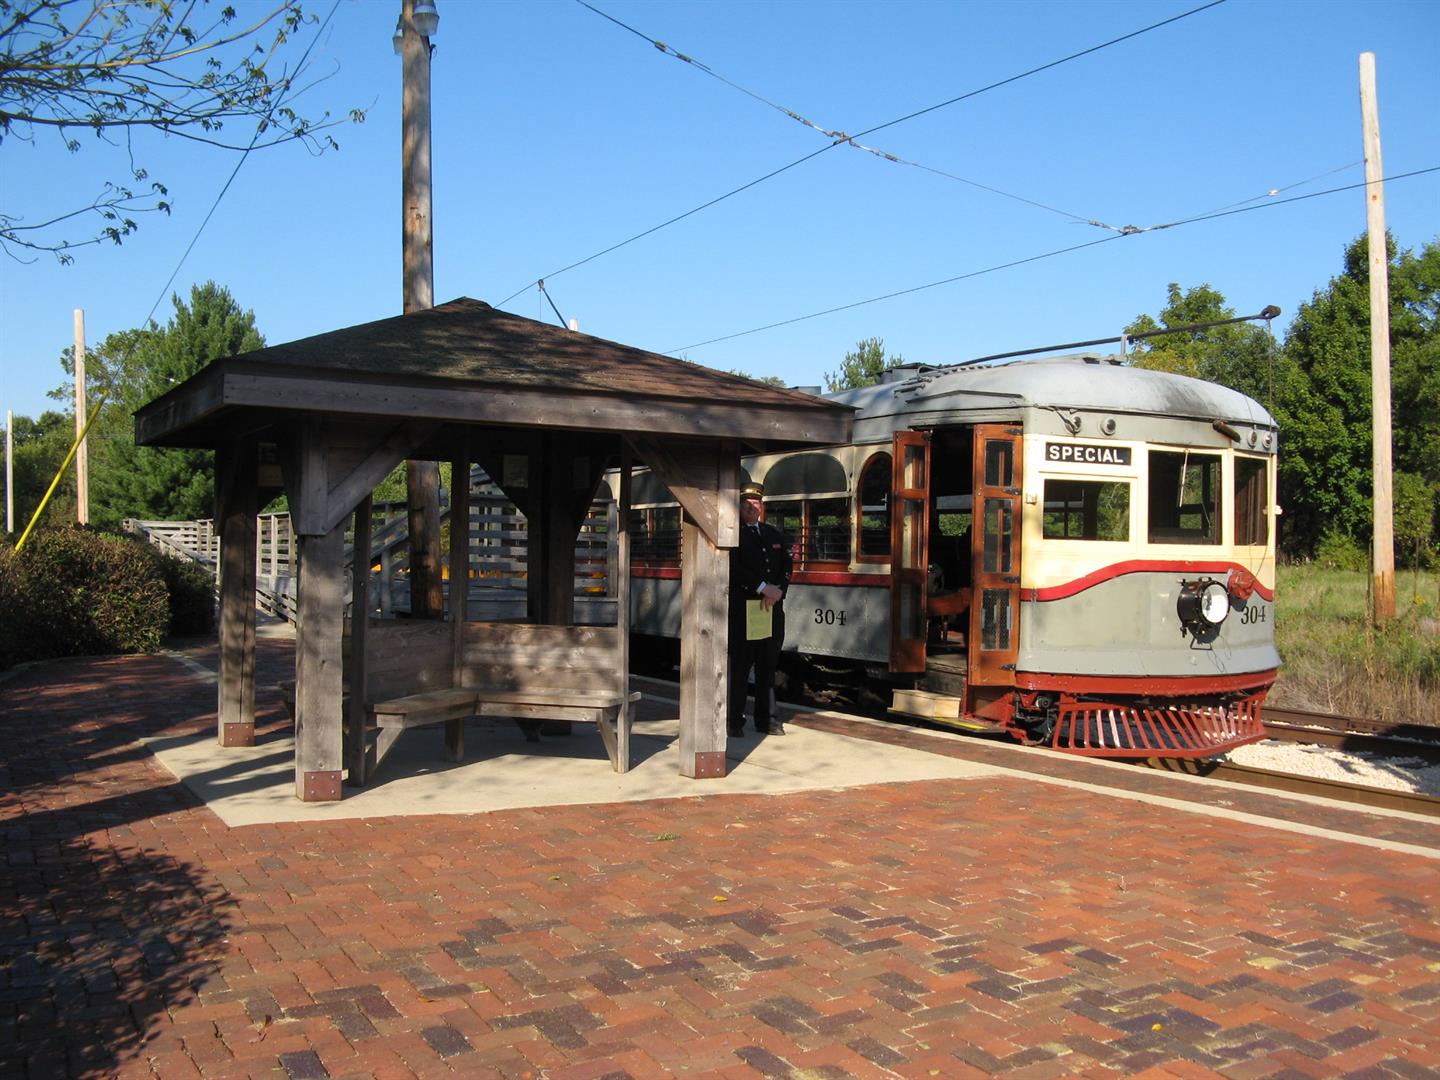 1924 Fox River Electric Trolley getting ready to depart north from the Blackhawk station in the Jon Duerr Forest Preserve